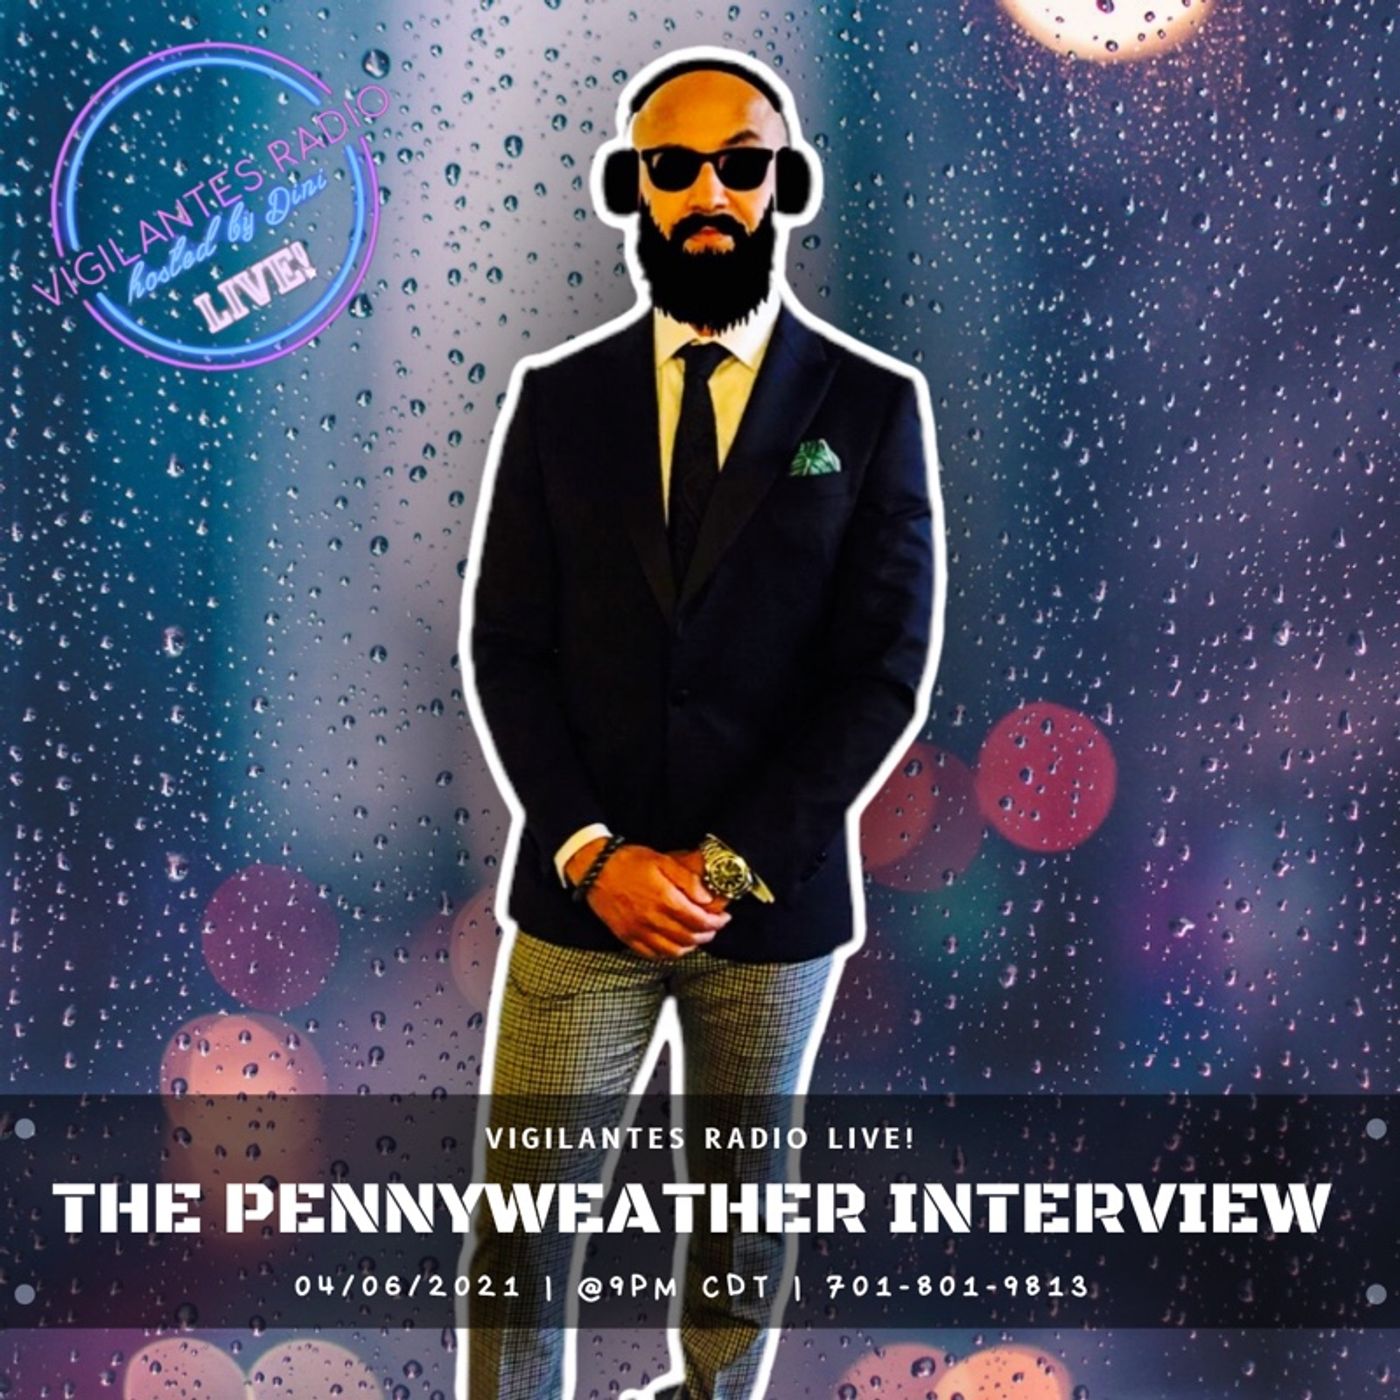 The Pennyweather Interview. Image